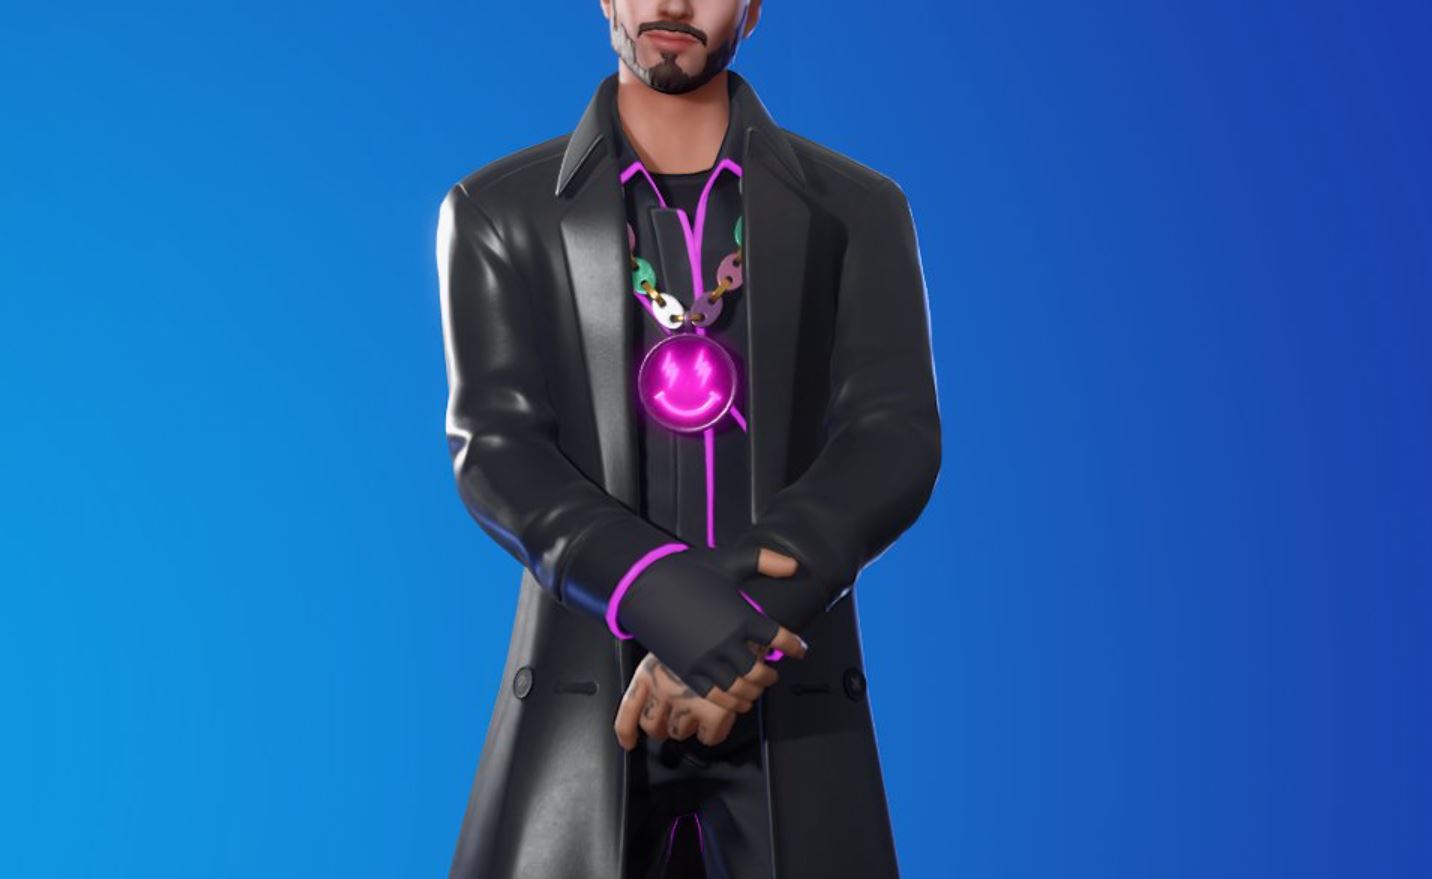 J Balvin Returns to Fortnite with the J Balvin Redux Outfit!